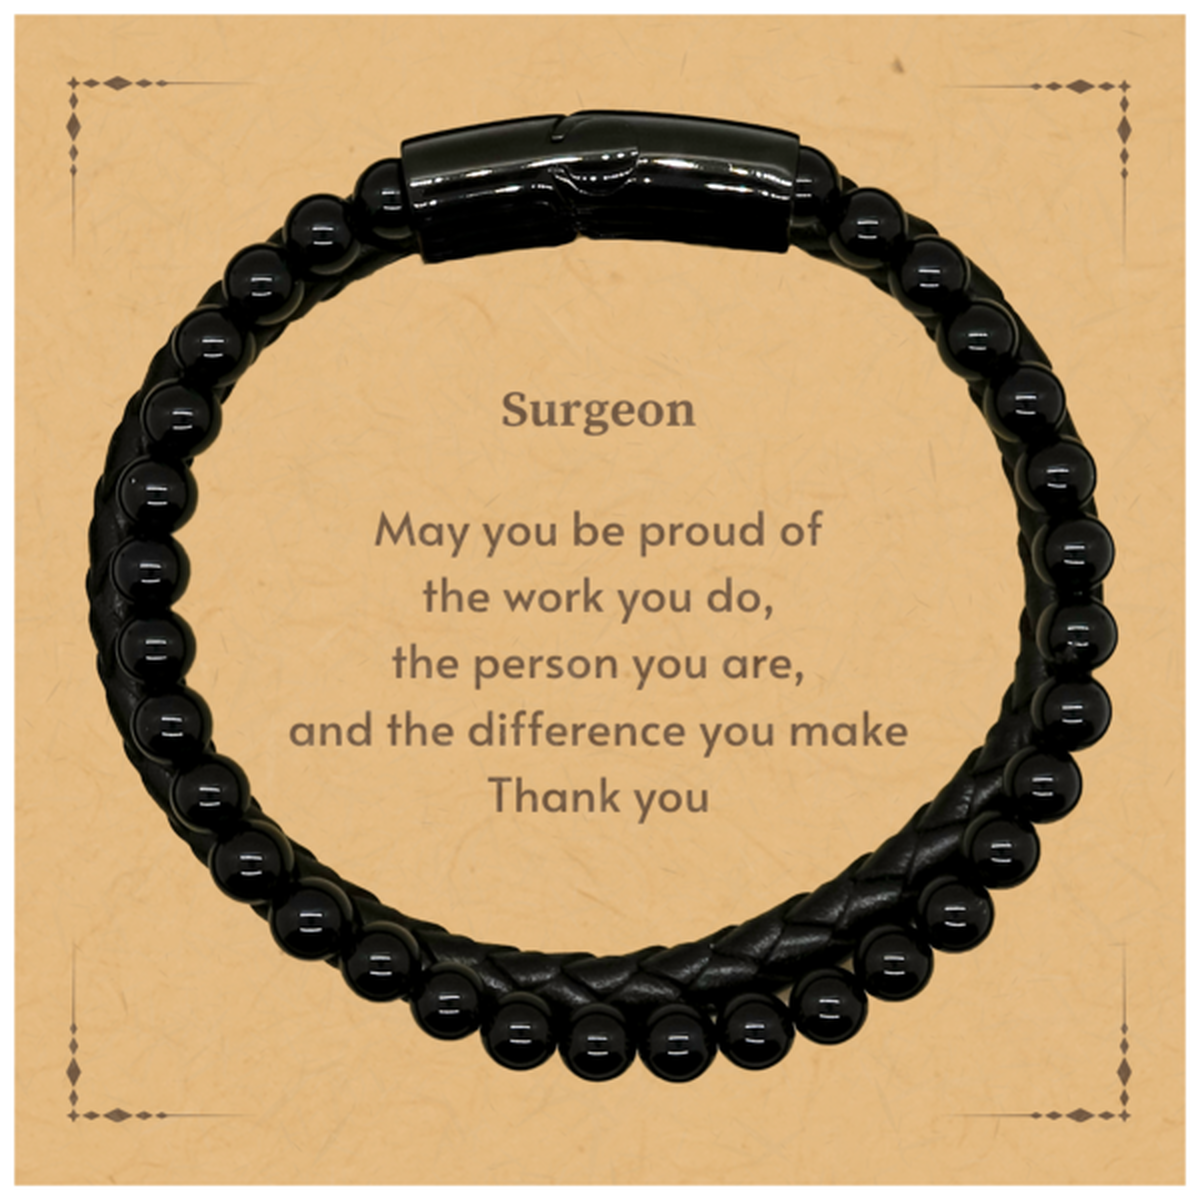 Heartwarming Stone Leather Bracelets Retirement Coworkers Gifts for Surgeon, Surgeon May You be proud of the work you do, the person you are Gifts for Boss Men Women Friends